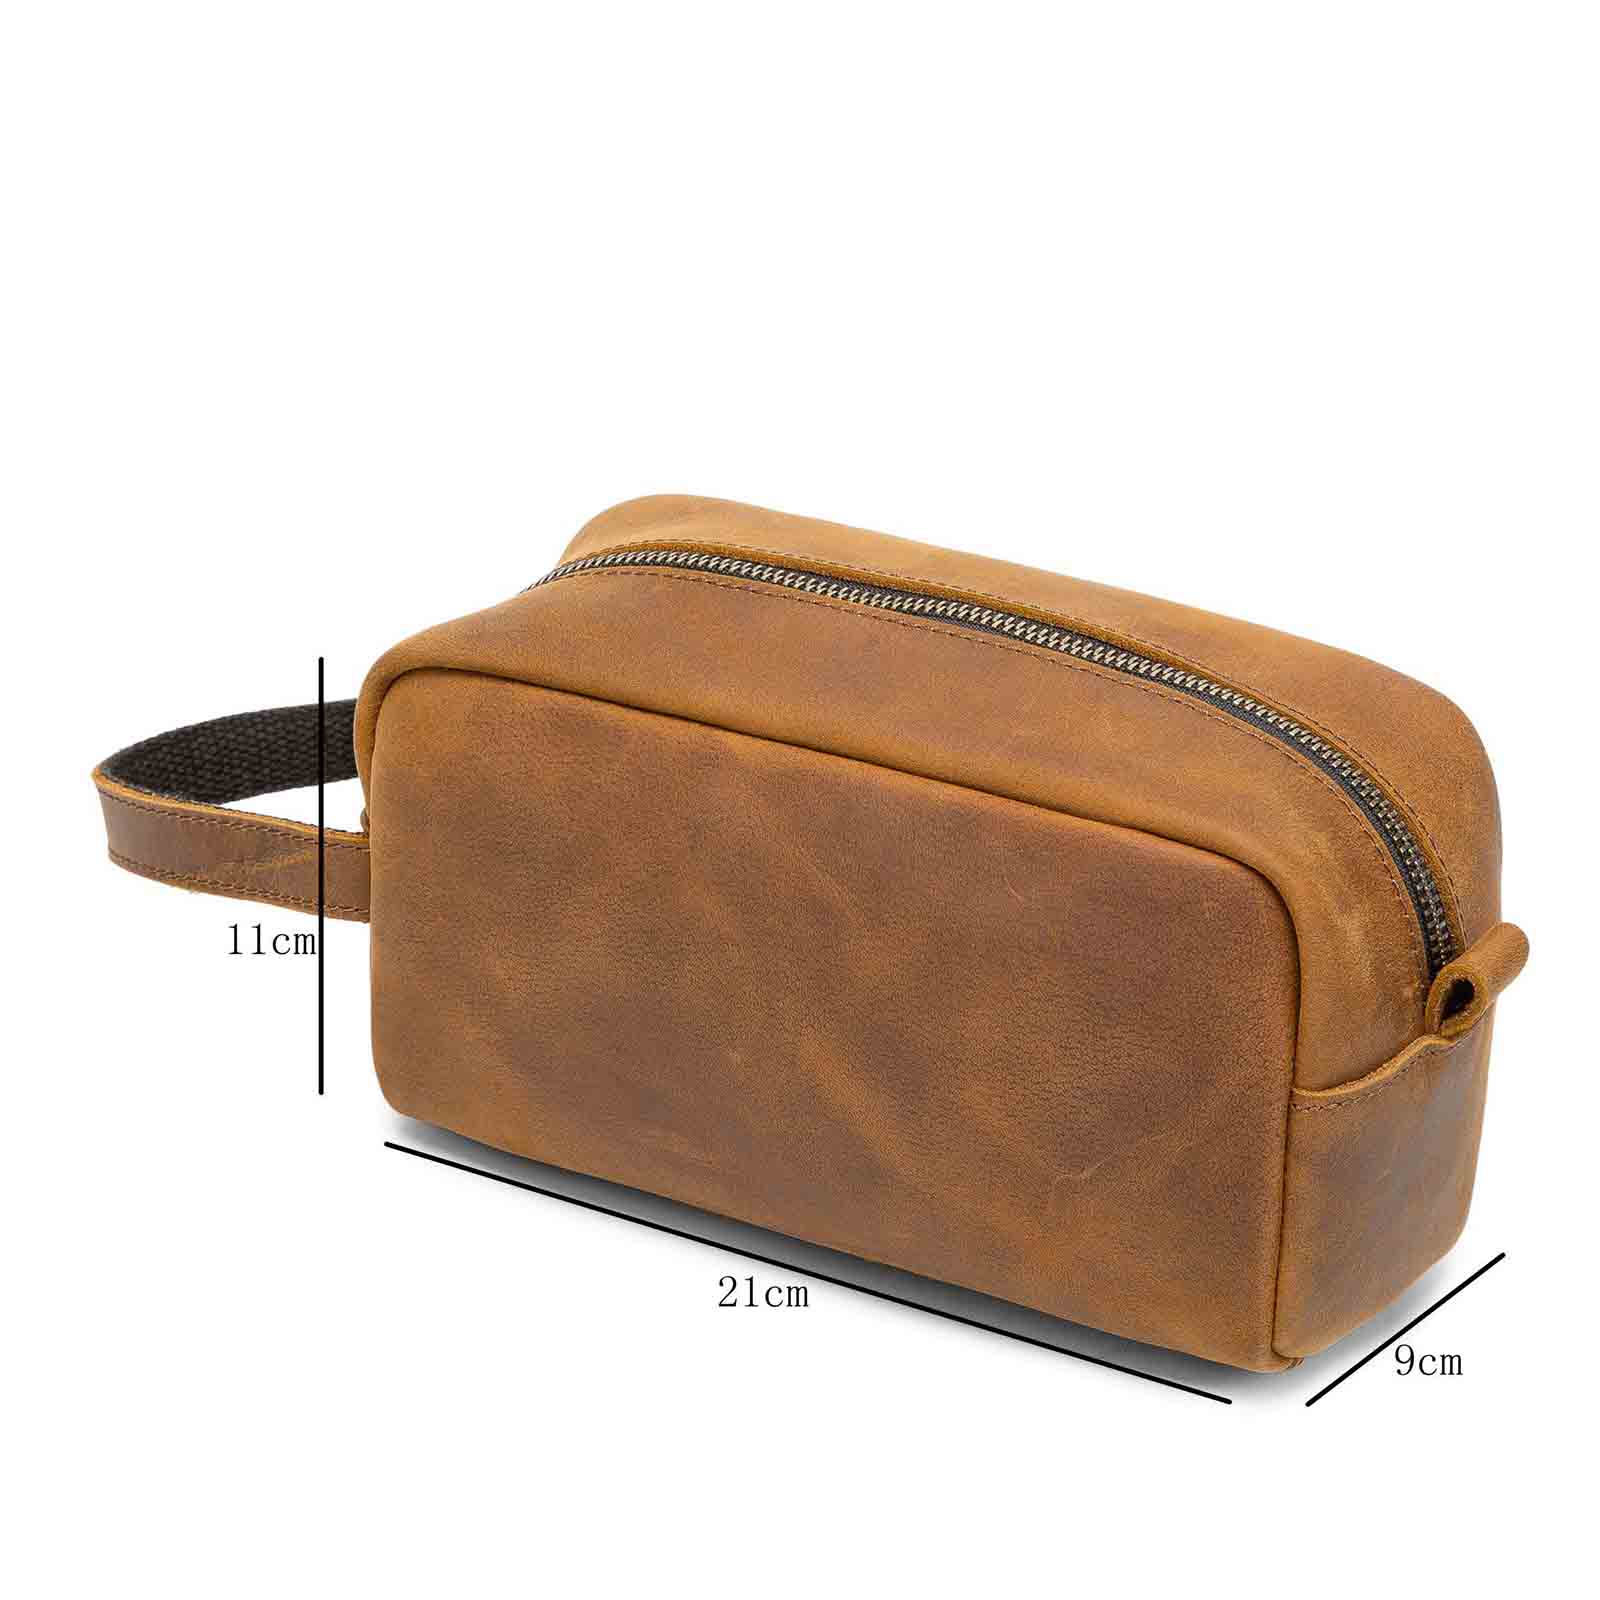 Crazy Horse Leather Toiletry Bag